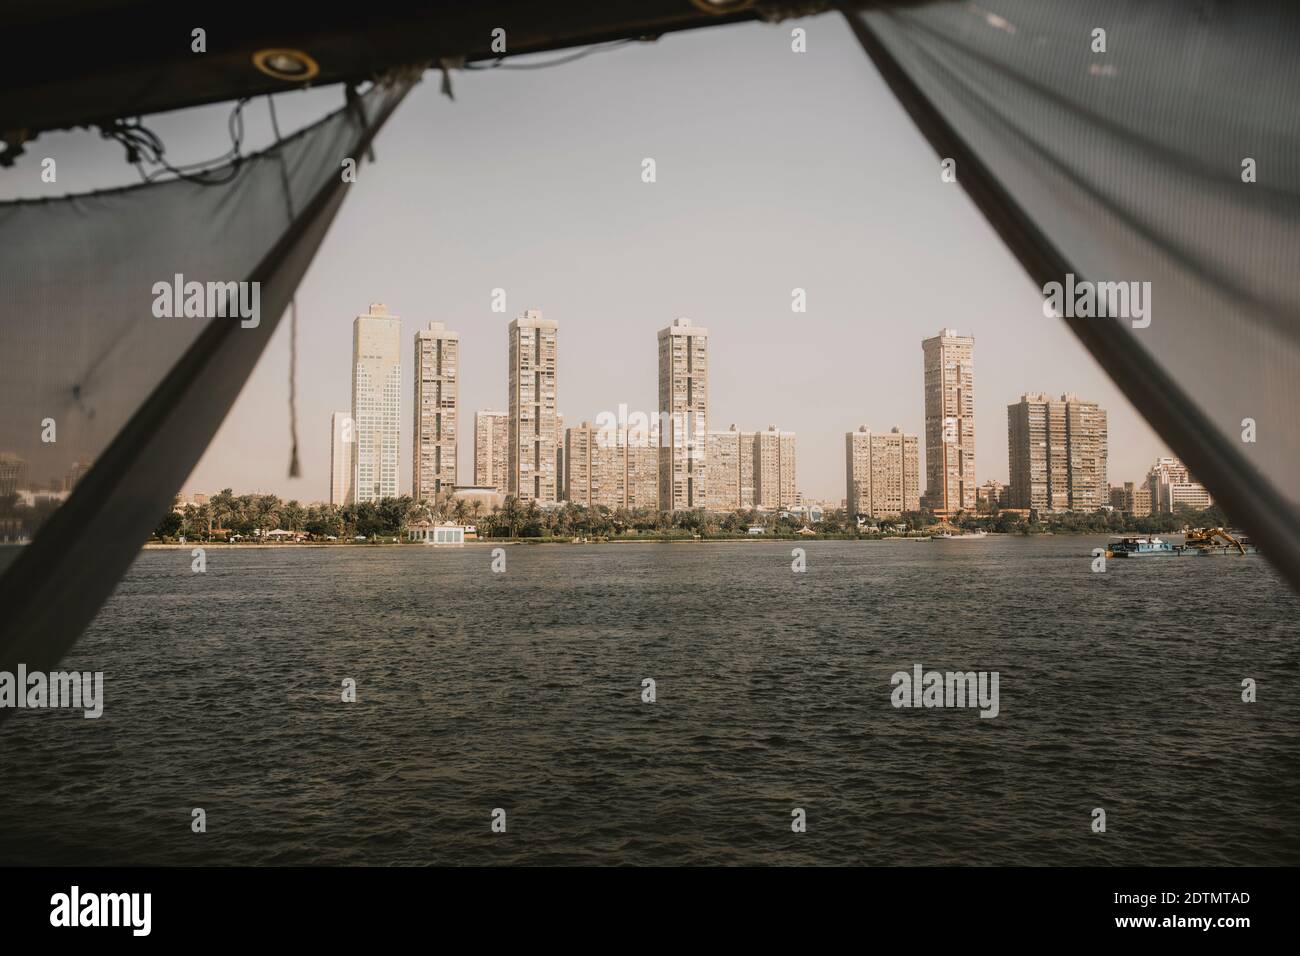 Views from traditional boat in a cruise in Cairo, Egypt Stock Photo